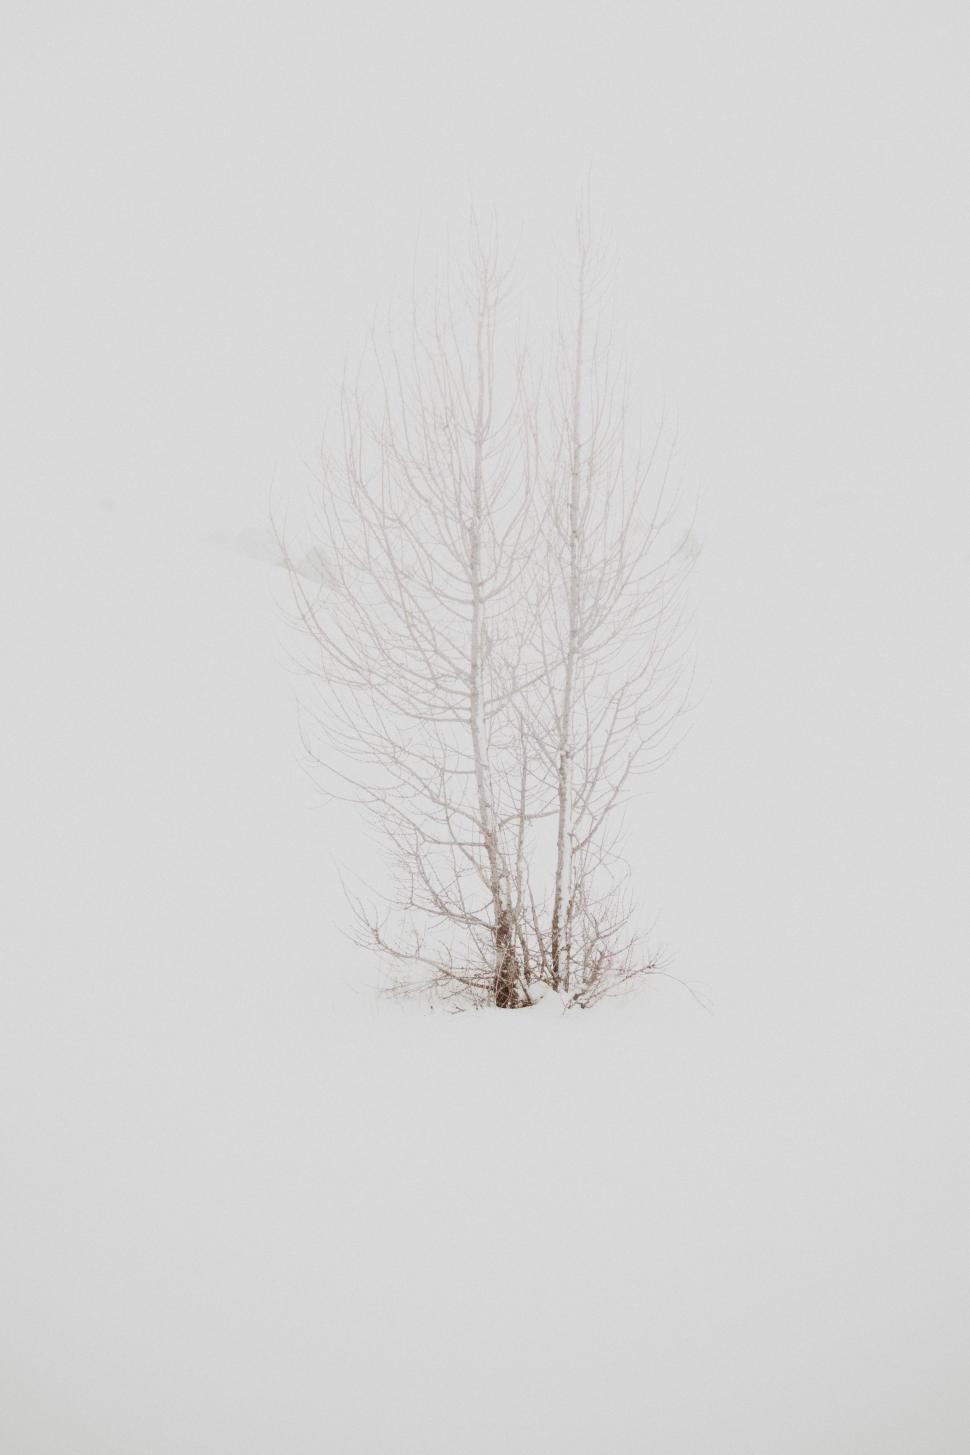 Free Image of Lone Tree Standing in Snowy Field 